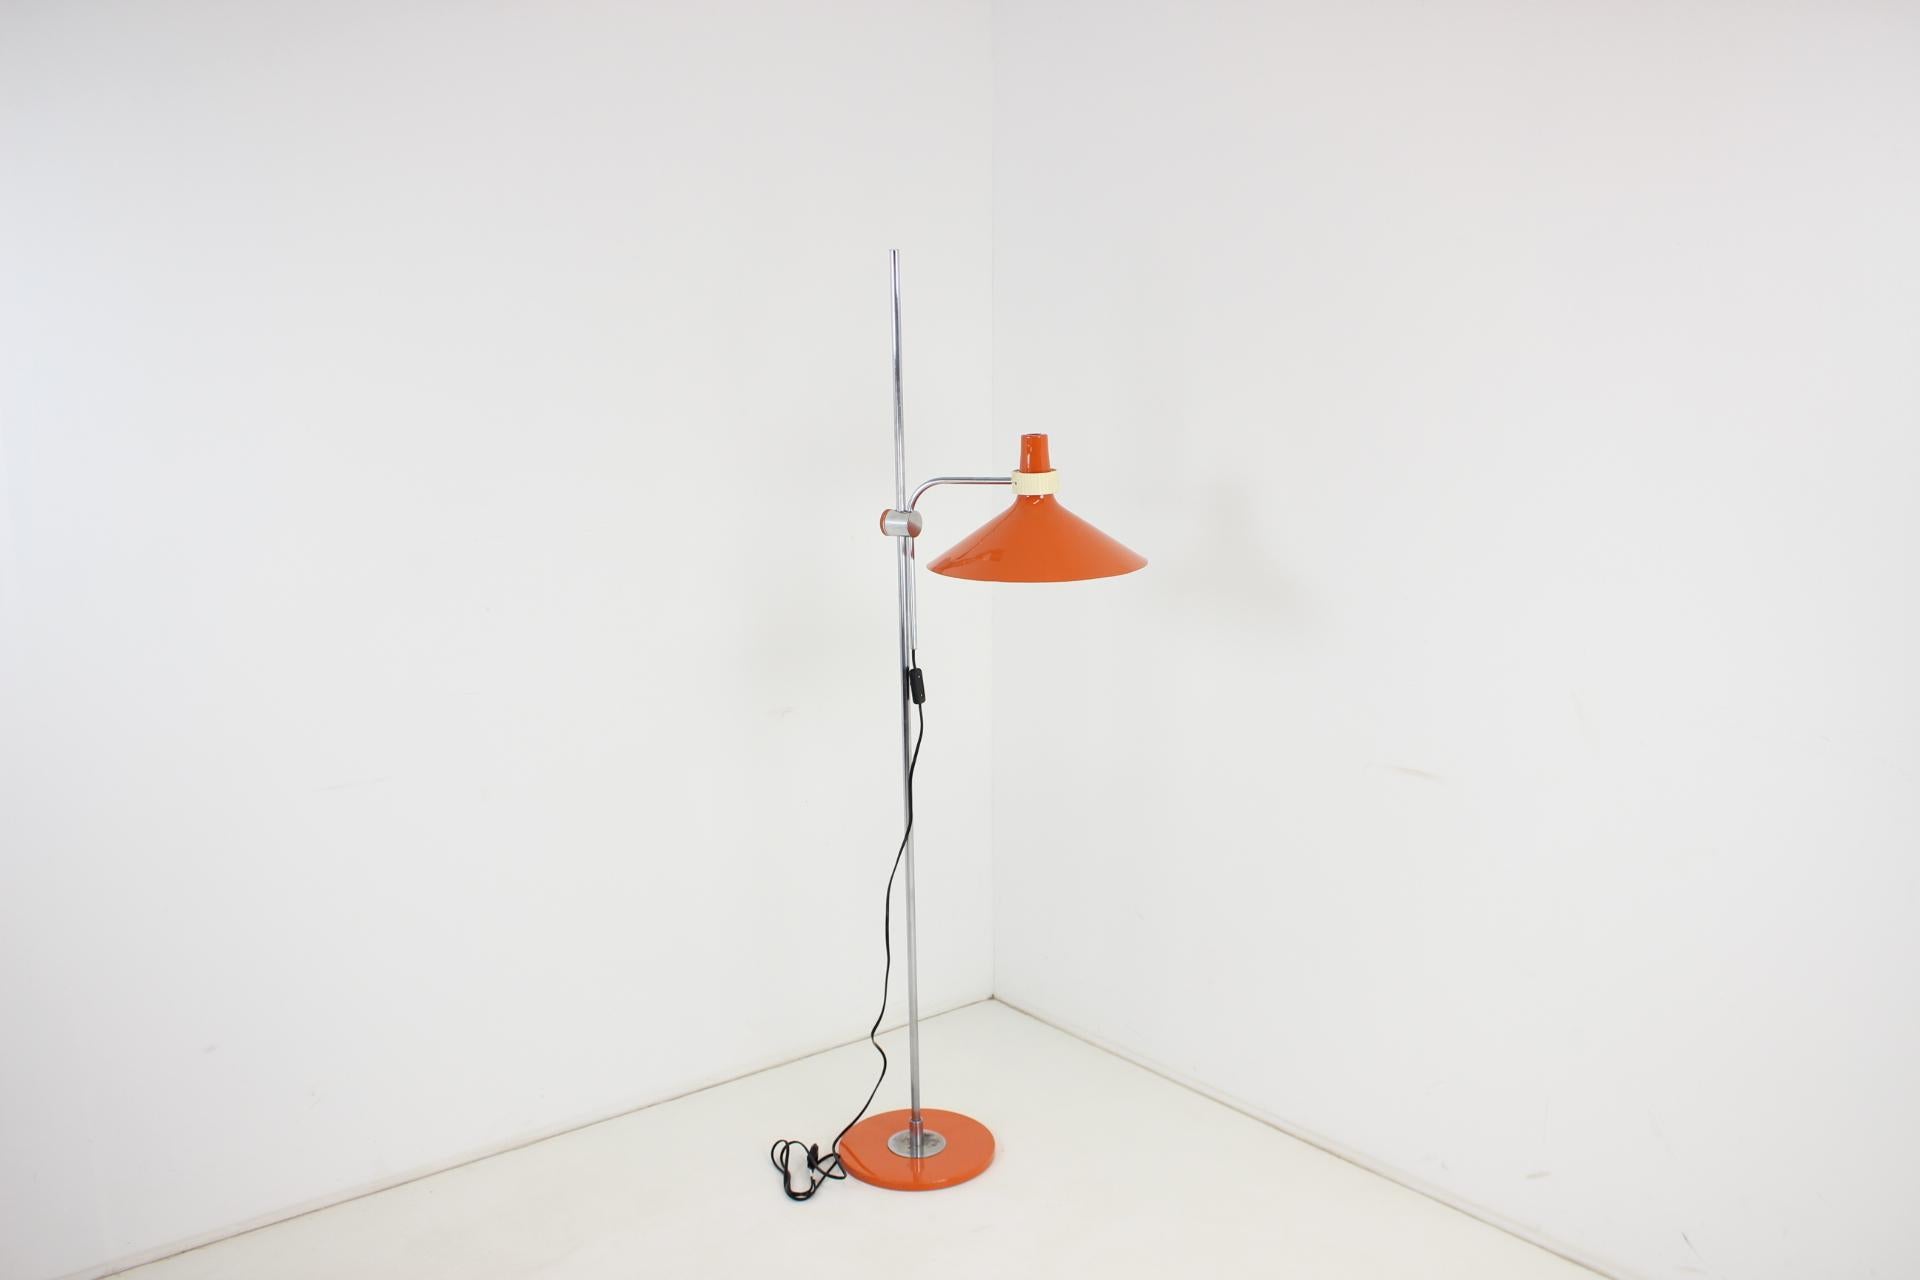 Made in Czechoslovakia,rare model
Made of metal, chrome
The lower part shows signs of age
Adjustable lampshade. 190 cm when extended at its highest
Bulb 1x60W, E27 or E26
American adapter included
New electrics